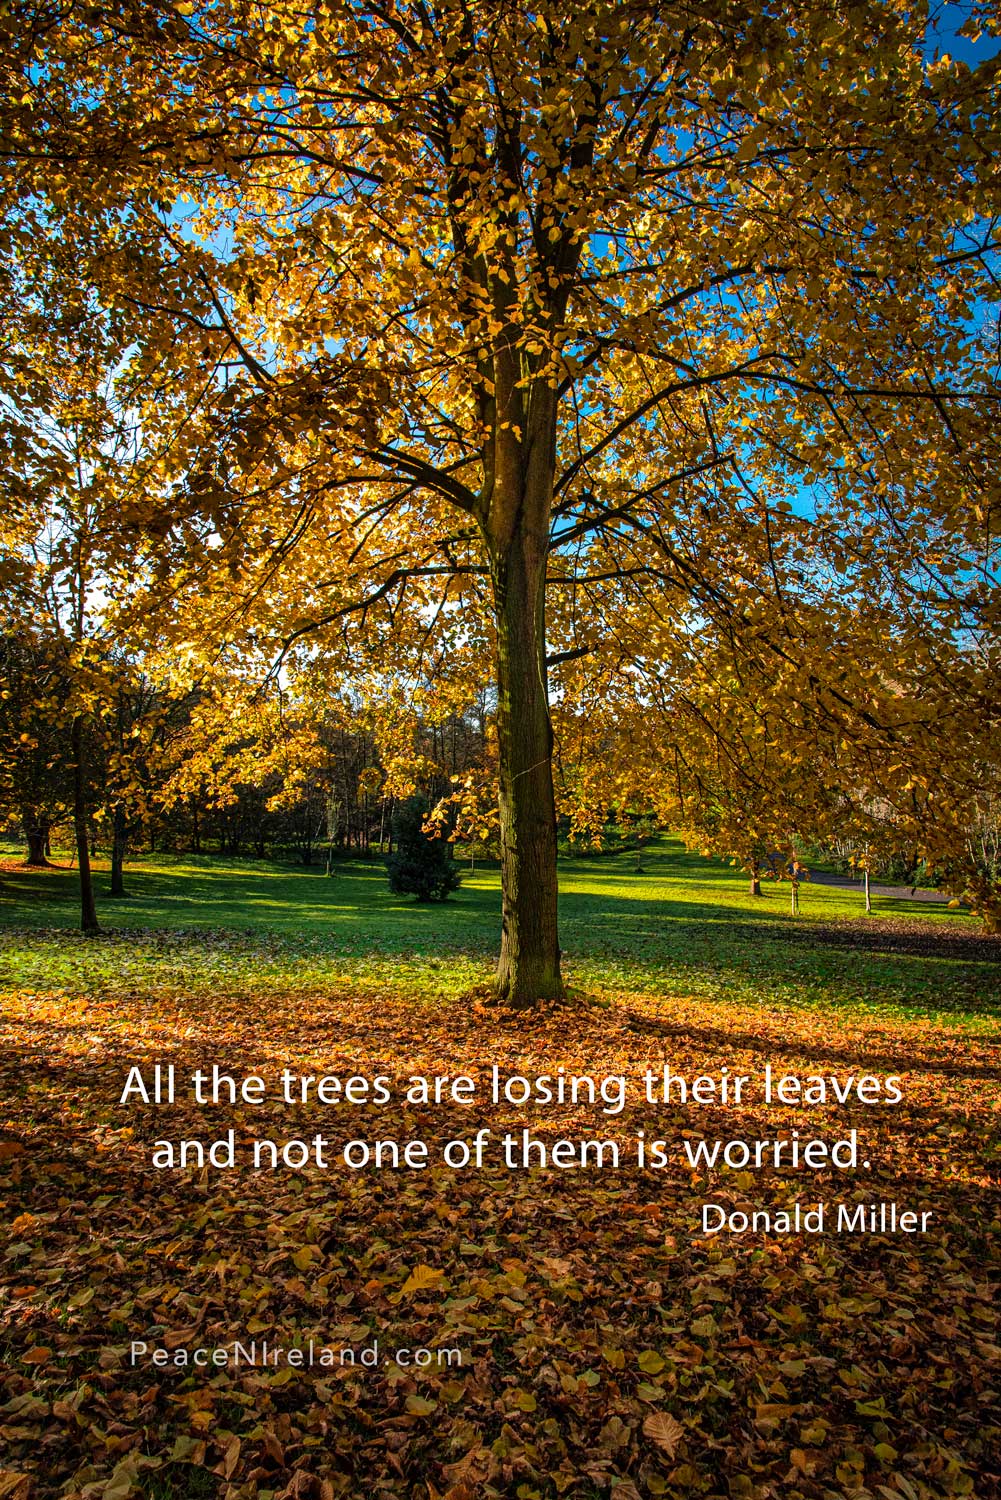 Trees losing Leaves: Donald Miller